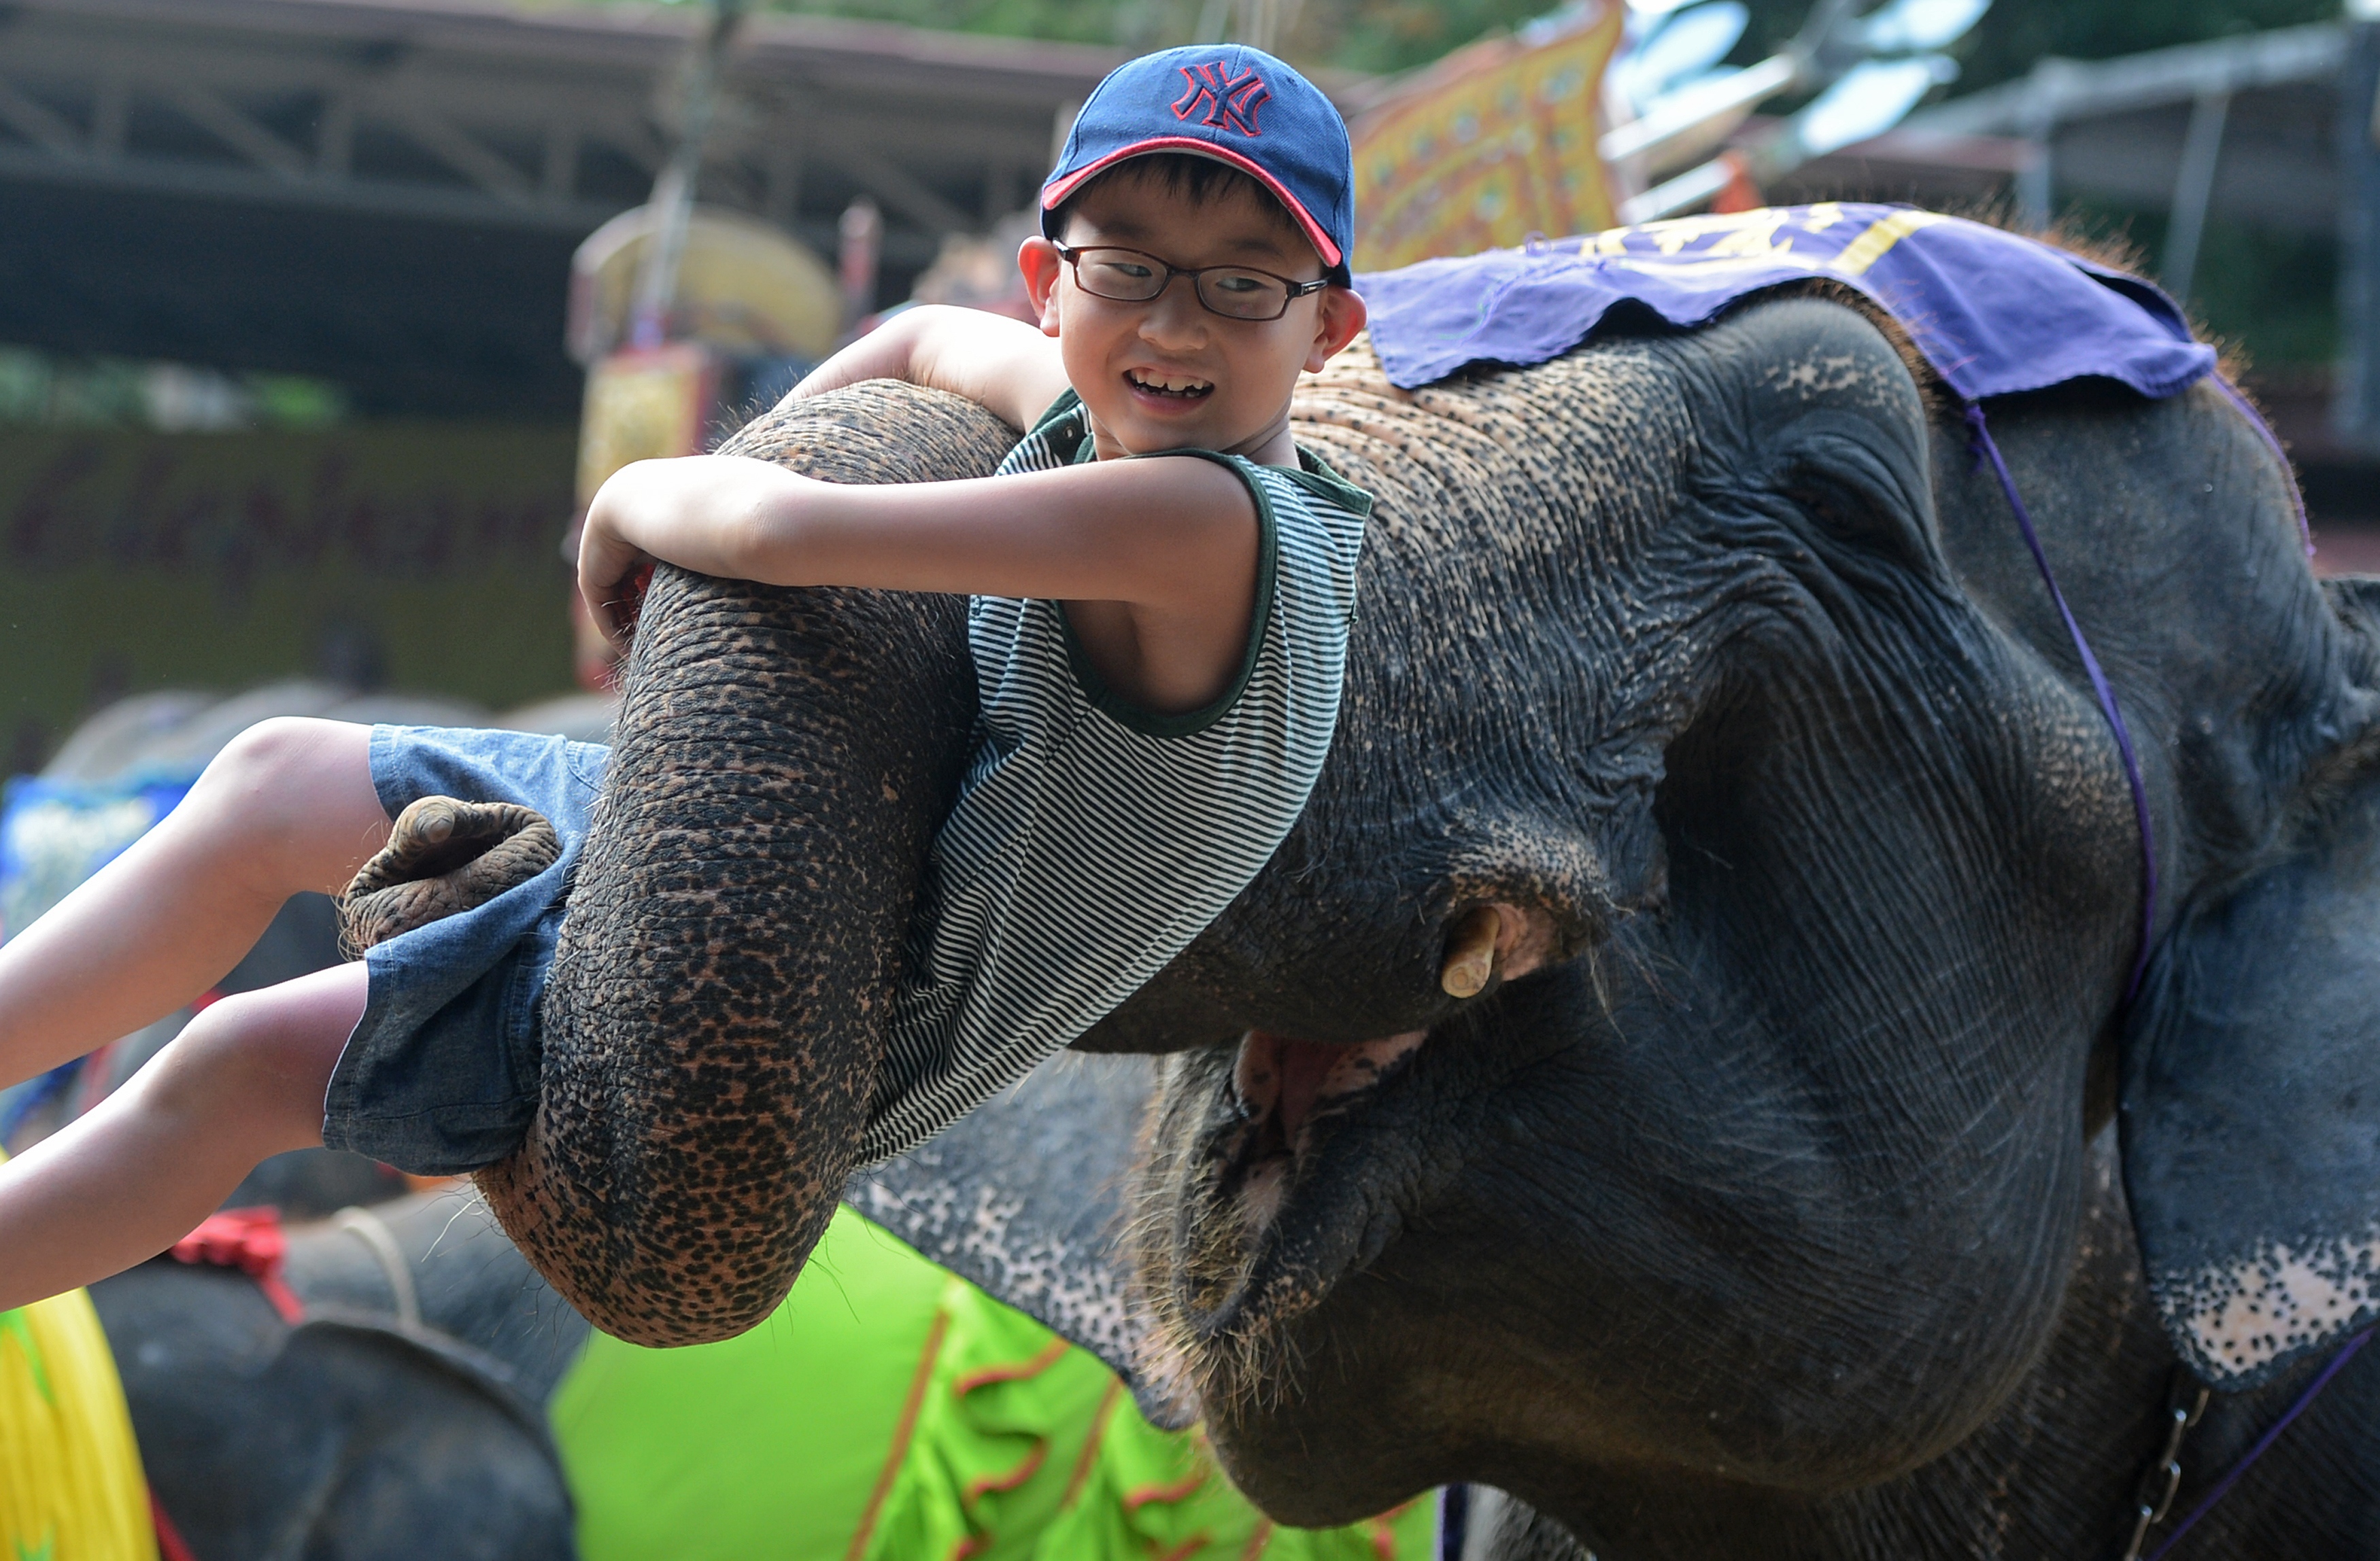 An elephant lifts a tourist during a show in Pattaya, Thailand on March 1, 2013. (Pornchai Kittiwongsakul—AFP/Getty Images)